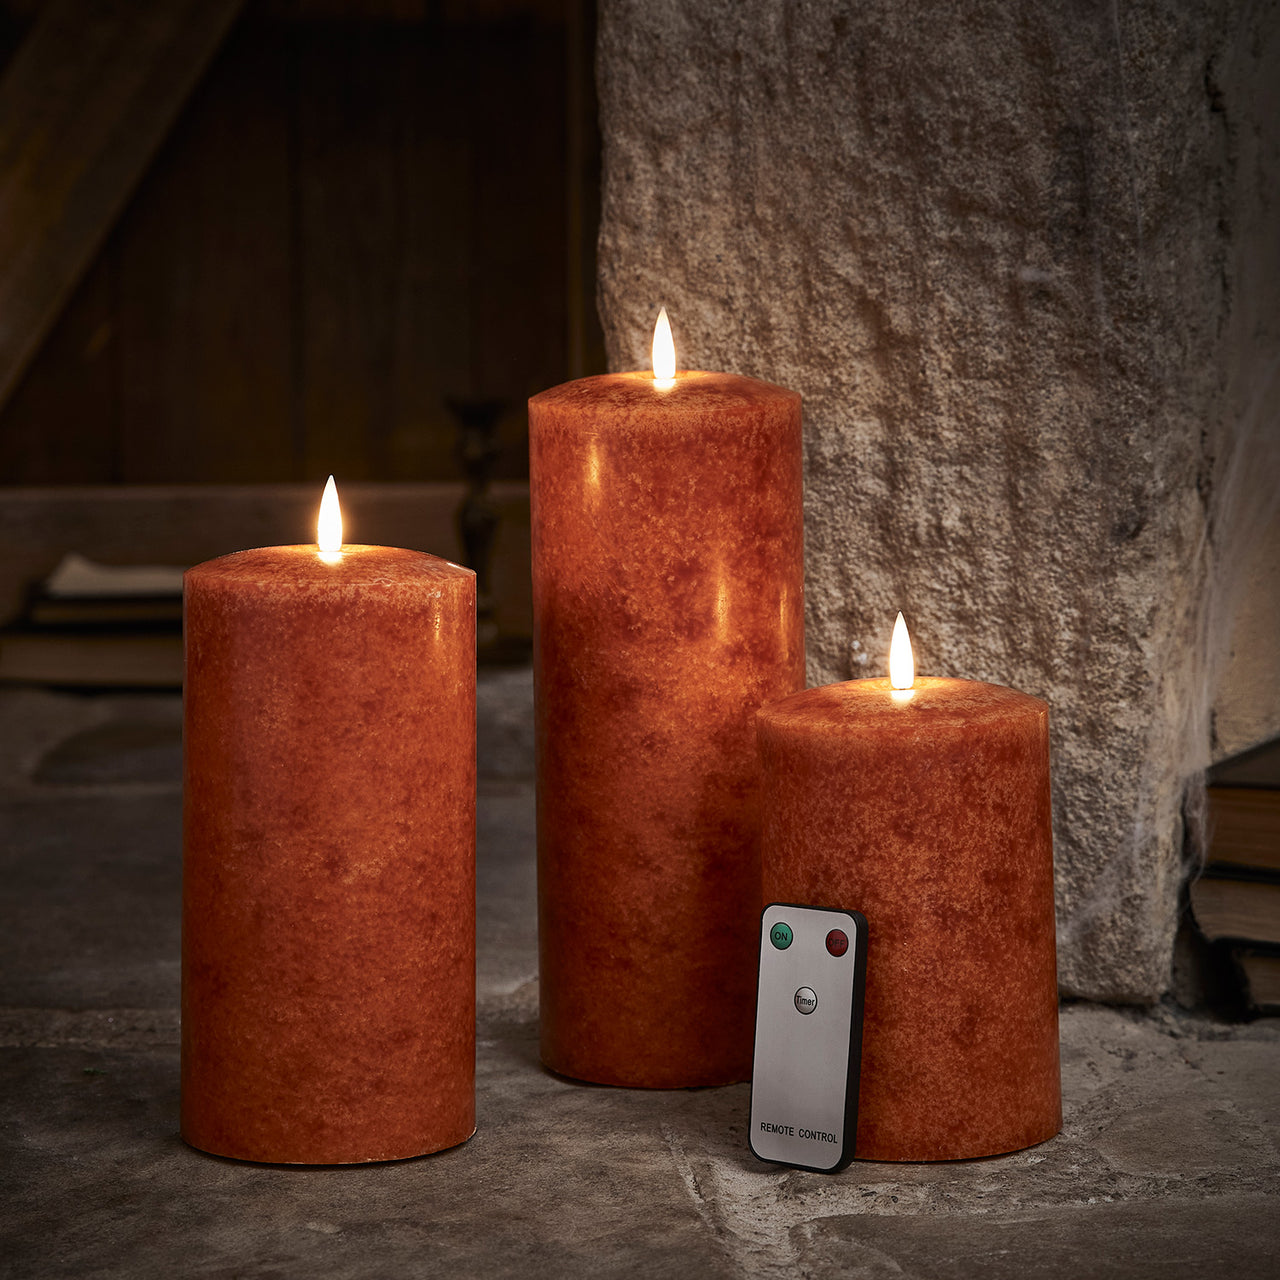 TruGlow® Mottled Orange LED Chapel Candle Trio with Remote Control